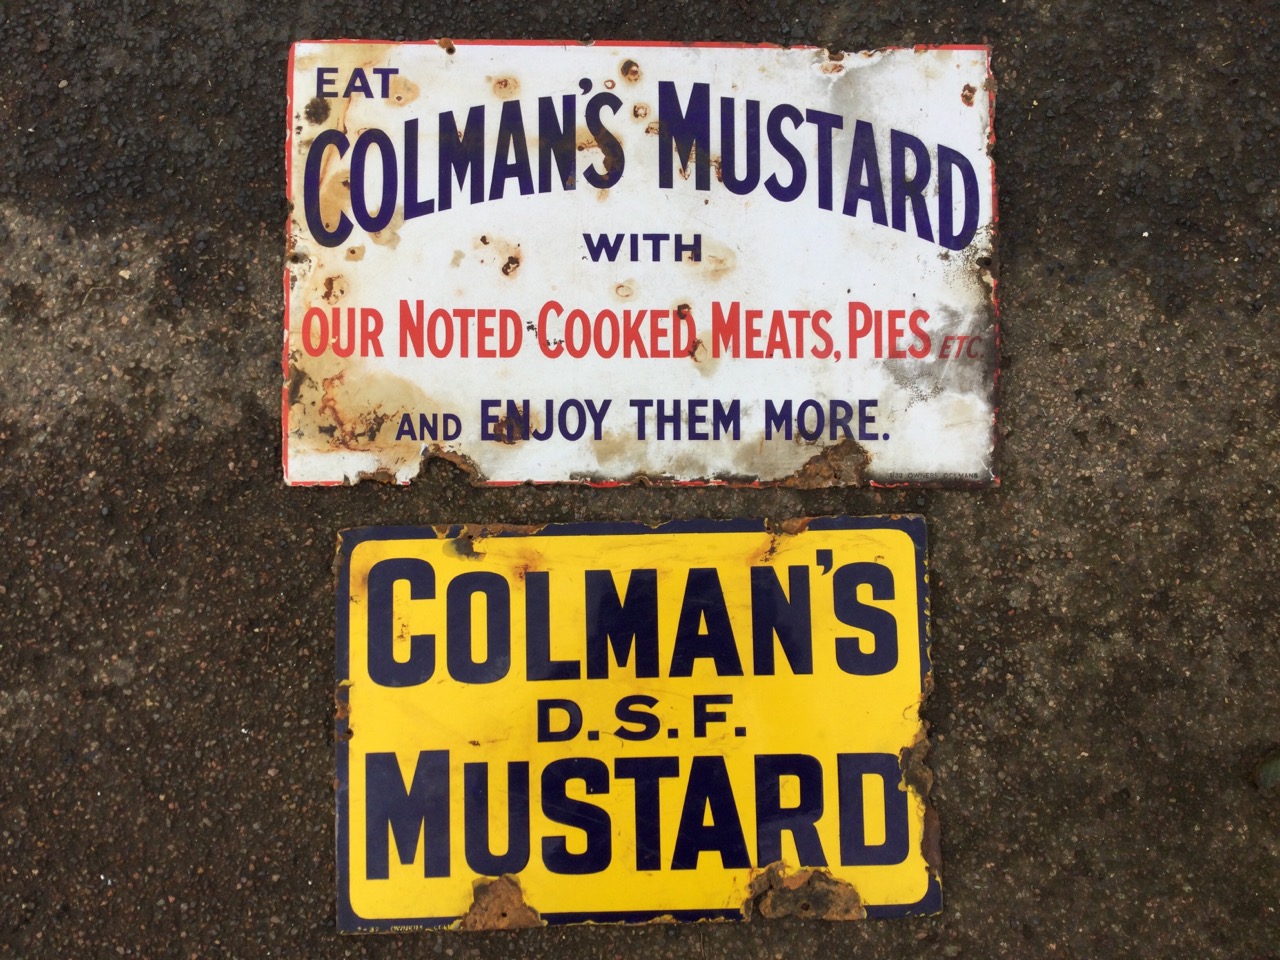 A rectangular enamelled advertising sign - Eat Colman’s Mustard with Our Noted Cooked Meats, Pies,